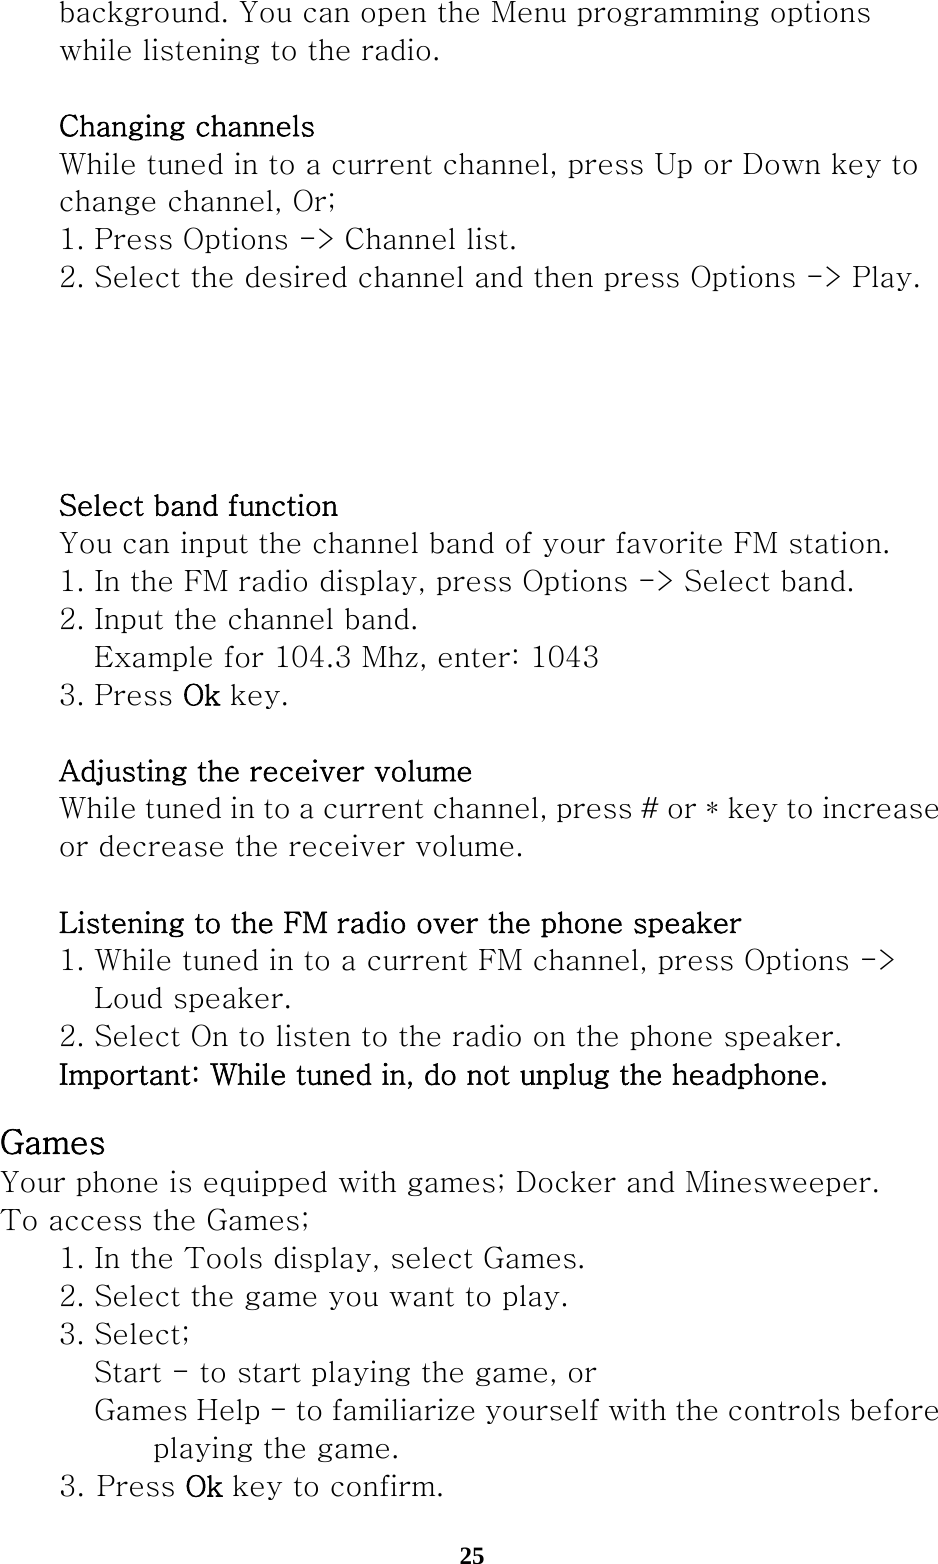  25  background. You can open the Menu programming options     while listening to the radio.       Changing channels  While tuned in to a current channel, press Up or Down key to     change channel, Or;   1. Press Options -&gt; Channel list.   2. Select the desired channel and then press Options -&gt; Play.          Select band function  You can input the channel band of your favorite FM station.     1. In the FM radio display, press Options -&gt; Select band.     2. Input the channel band.       Example for 104.3 Mhz, enter: 1043   3. Press Ok key.     Adjusting the receiver volume   While tuned in to a current channel, press # or * key to increase     or decrease the receiver volume.    Listening to the FM radio over the phone speaker   1. While tuned in to a current FM channel, press Options -&gt;     Loud speaker.    2. Select On to listen to the radio on the phone speaker.  Important: While tuned in, do not unplug the headphone.   Games Your phone is equipped with games; Docker and Minesweeper. To access the Games;   1. In the Tools display, select Games.   2. Select the game you want to play.   3. Select;     Start - to start playing the game, or       Games Help - to familiarize yourself with the controls before        playing the game. 3. Press Ok key to confirm. 